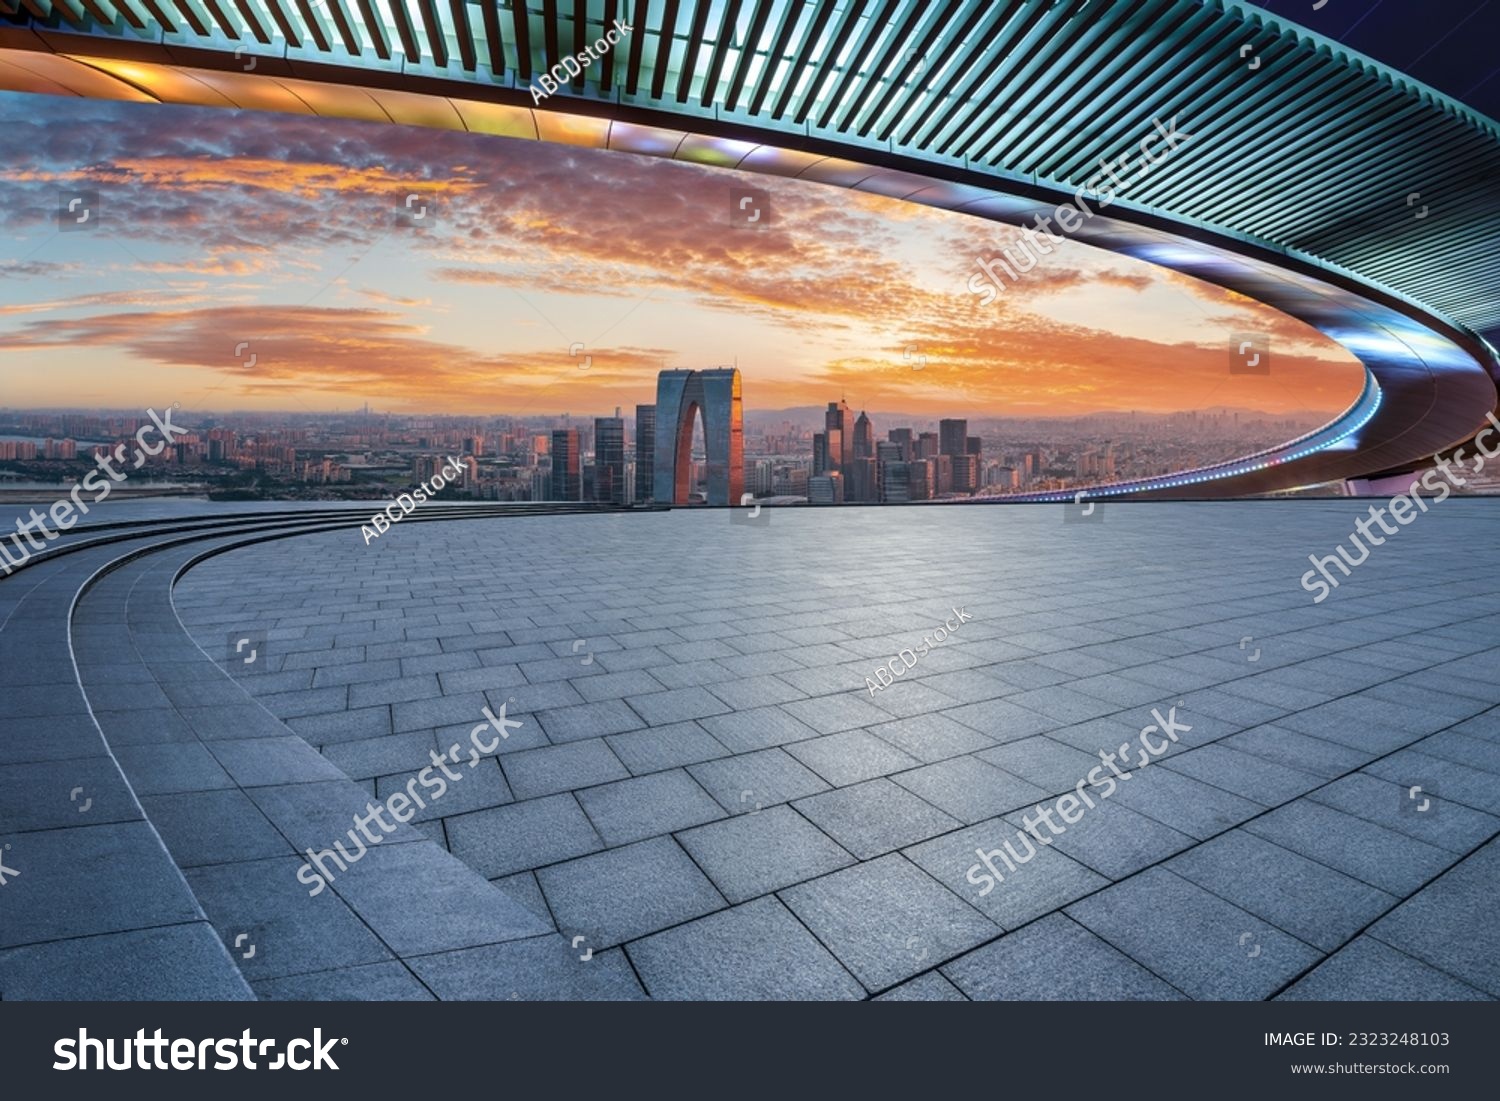 Empty square floors and city skyline with modern buildings at sunset in Suzhou, Jiangsu Province, China. high angle view. #2323248103